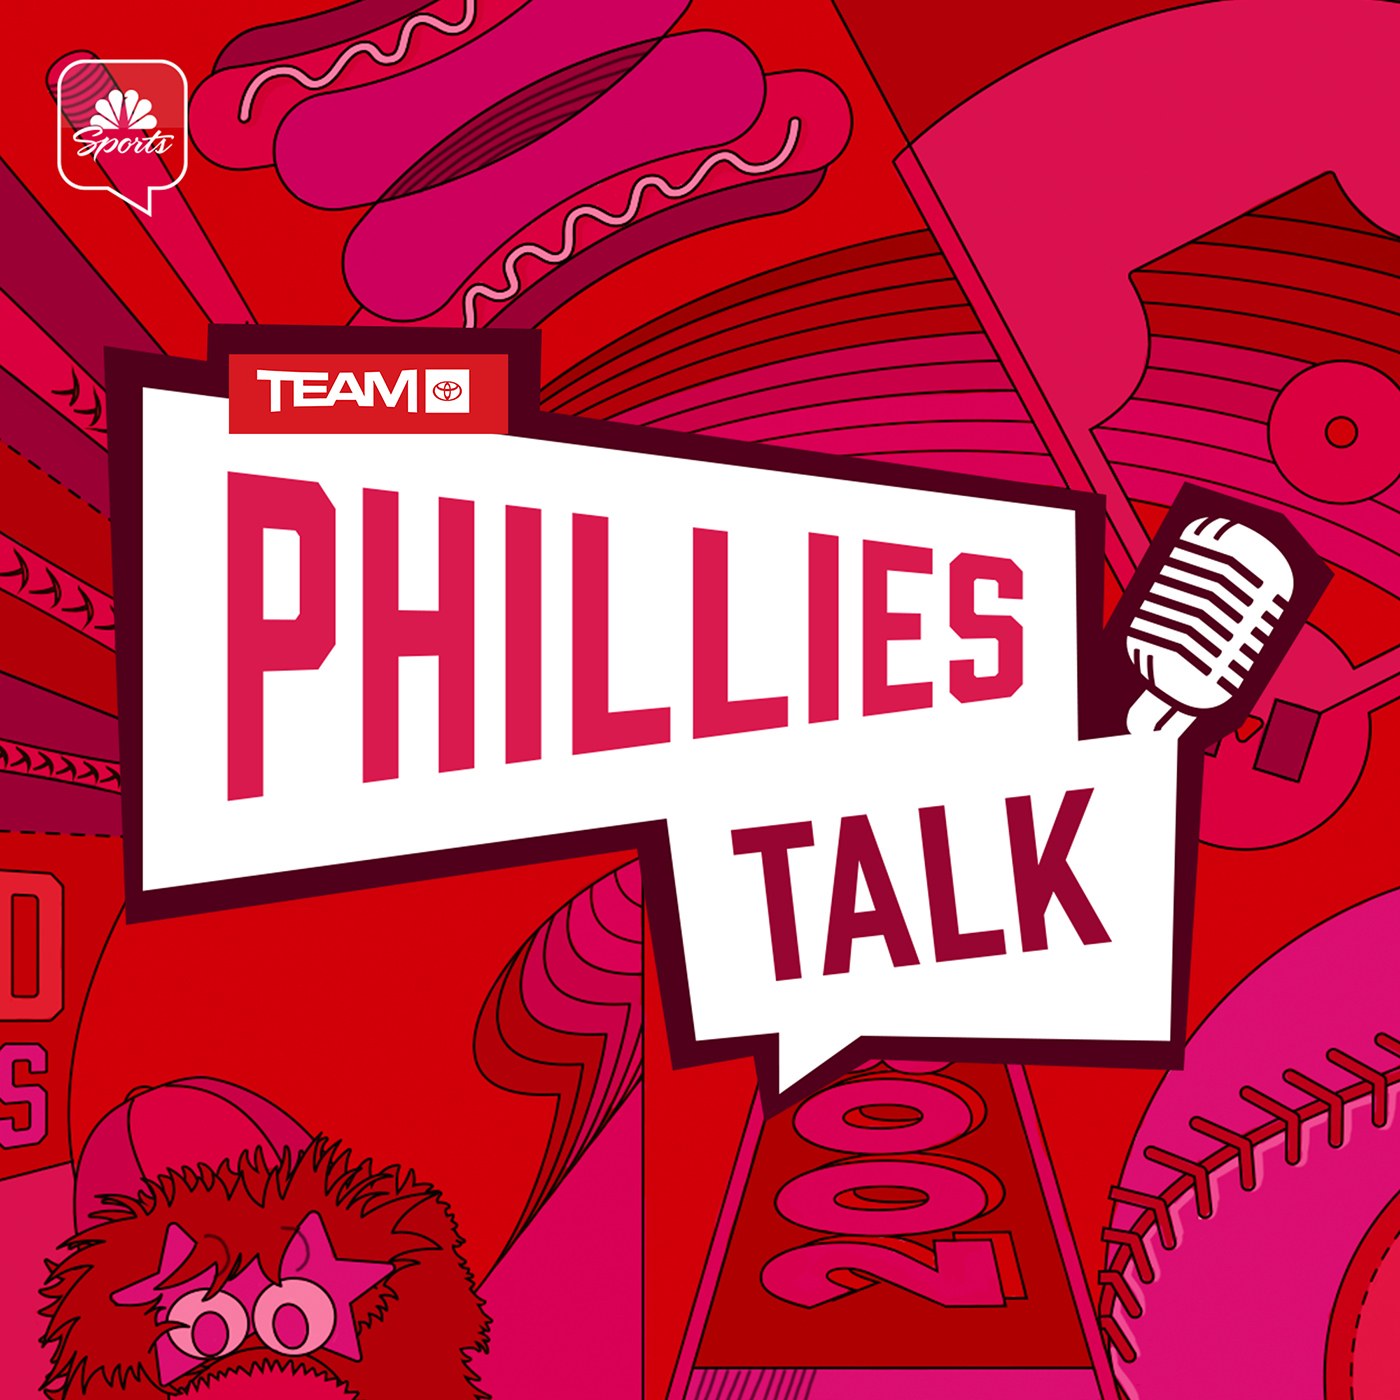 Phillies wild-card opponent, playoff roster and more